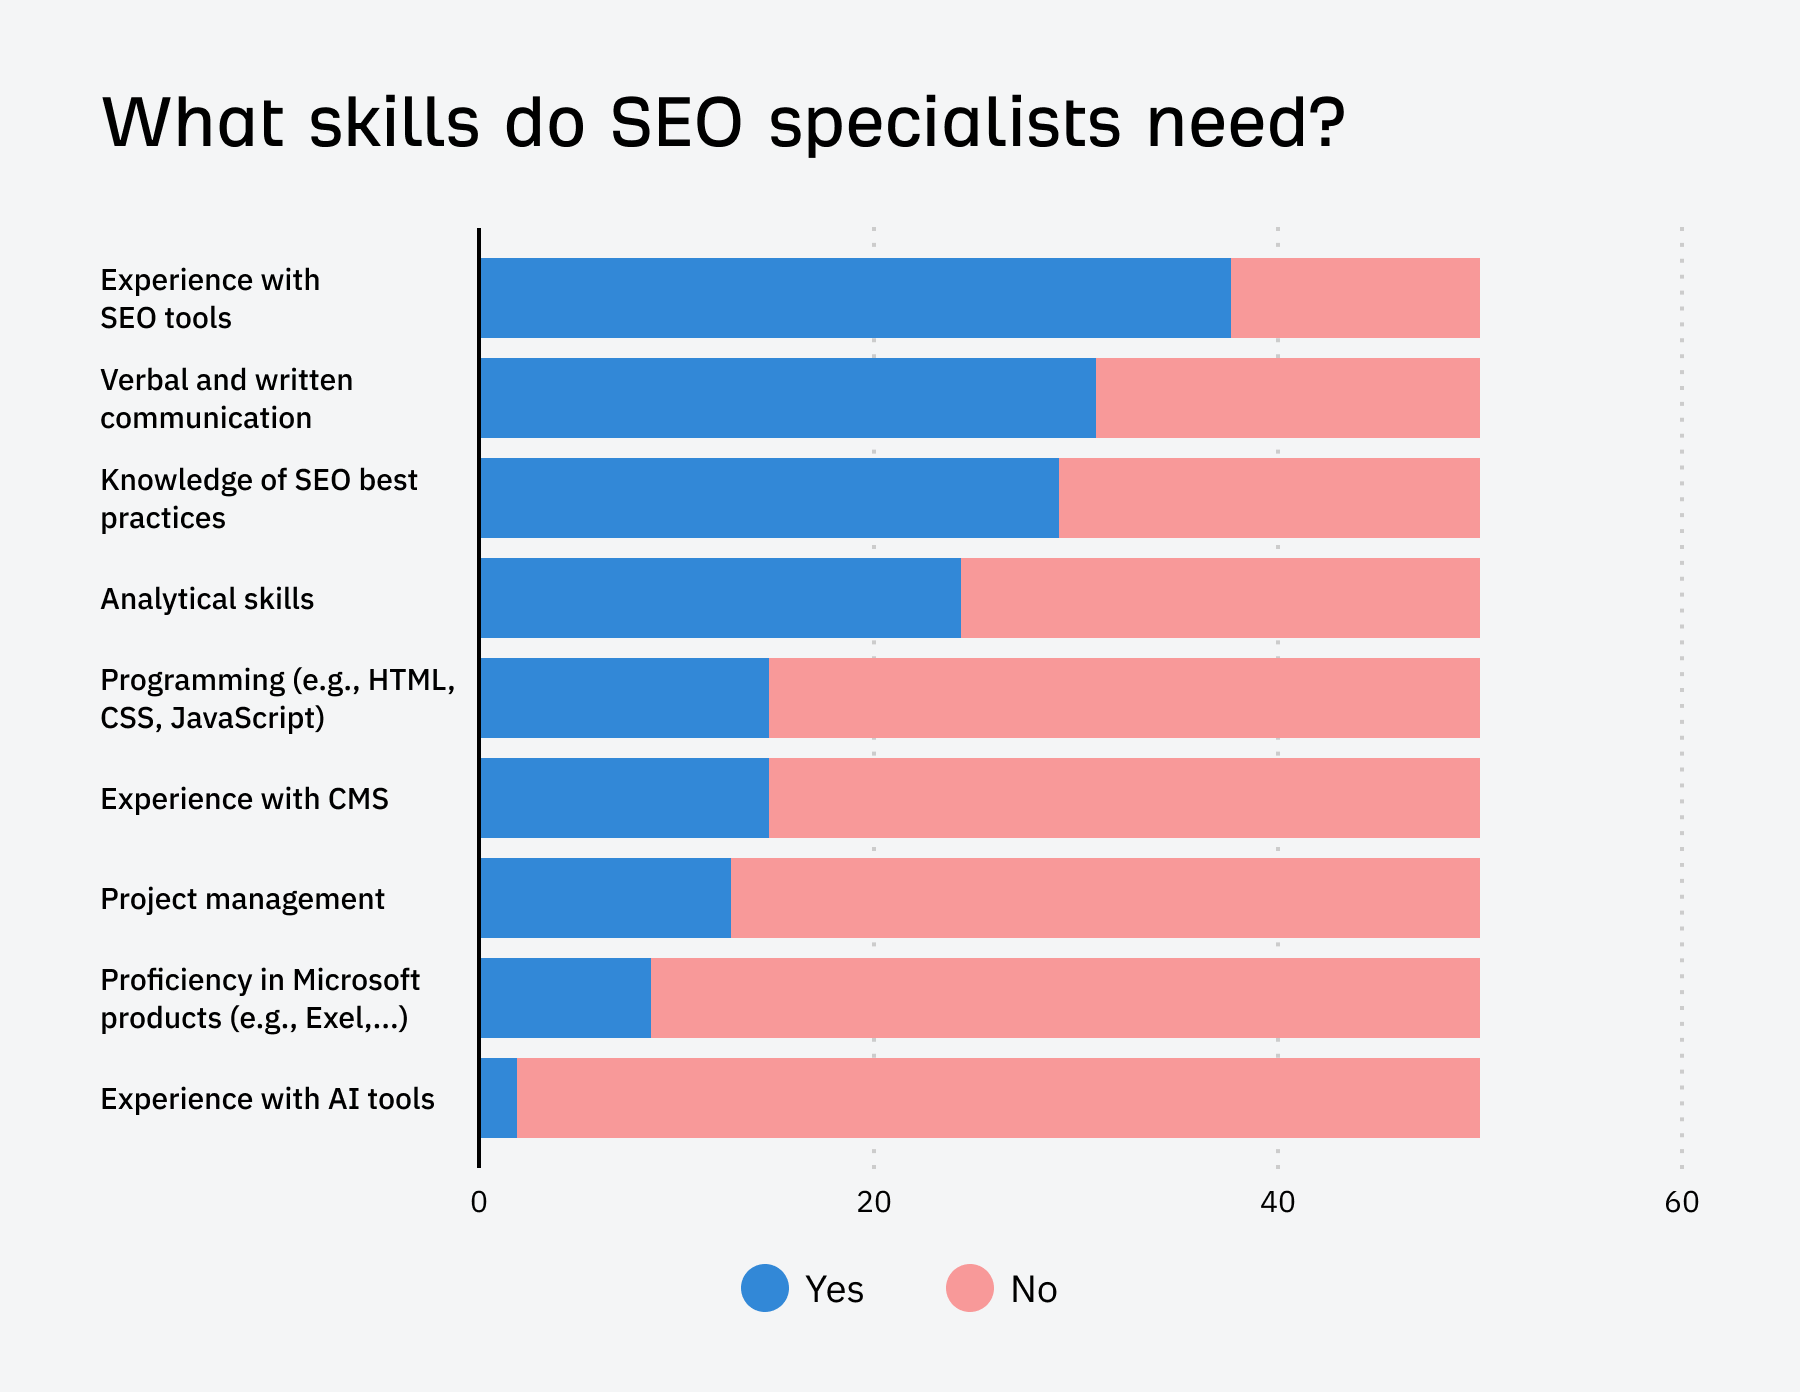 Chart showing skills SEO specialists need